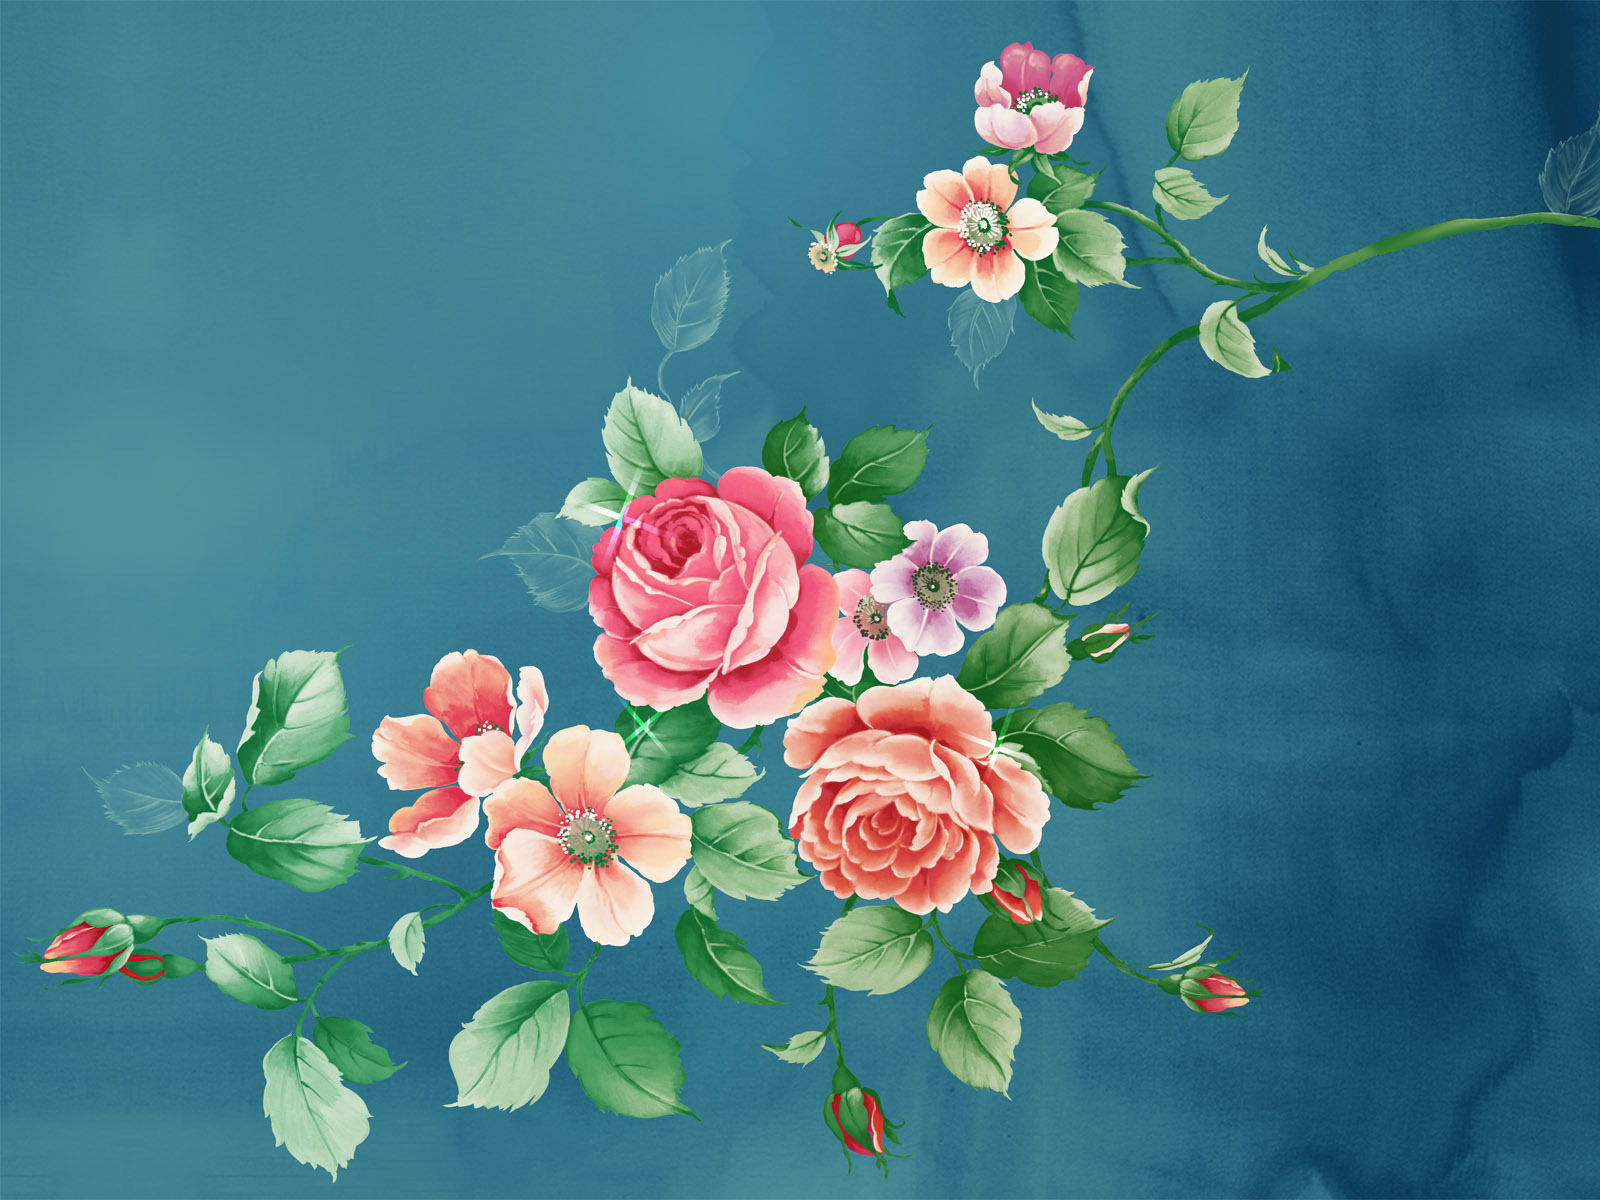 plants, roses, pictures, flowers, turquoise images